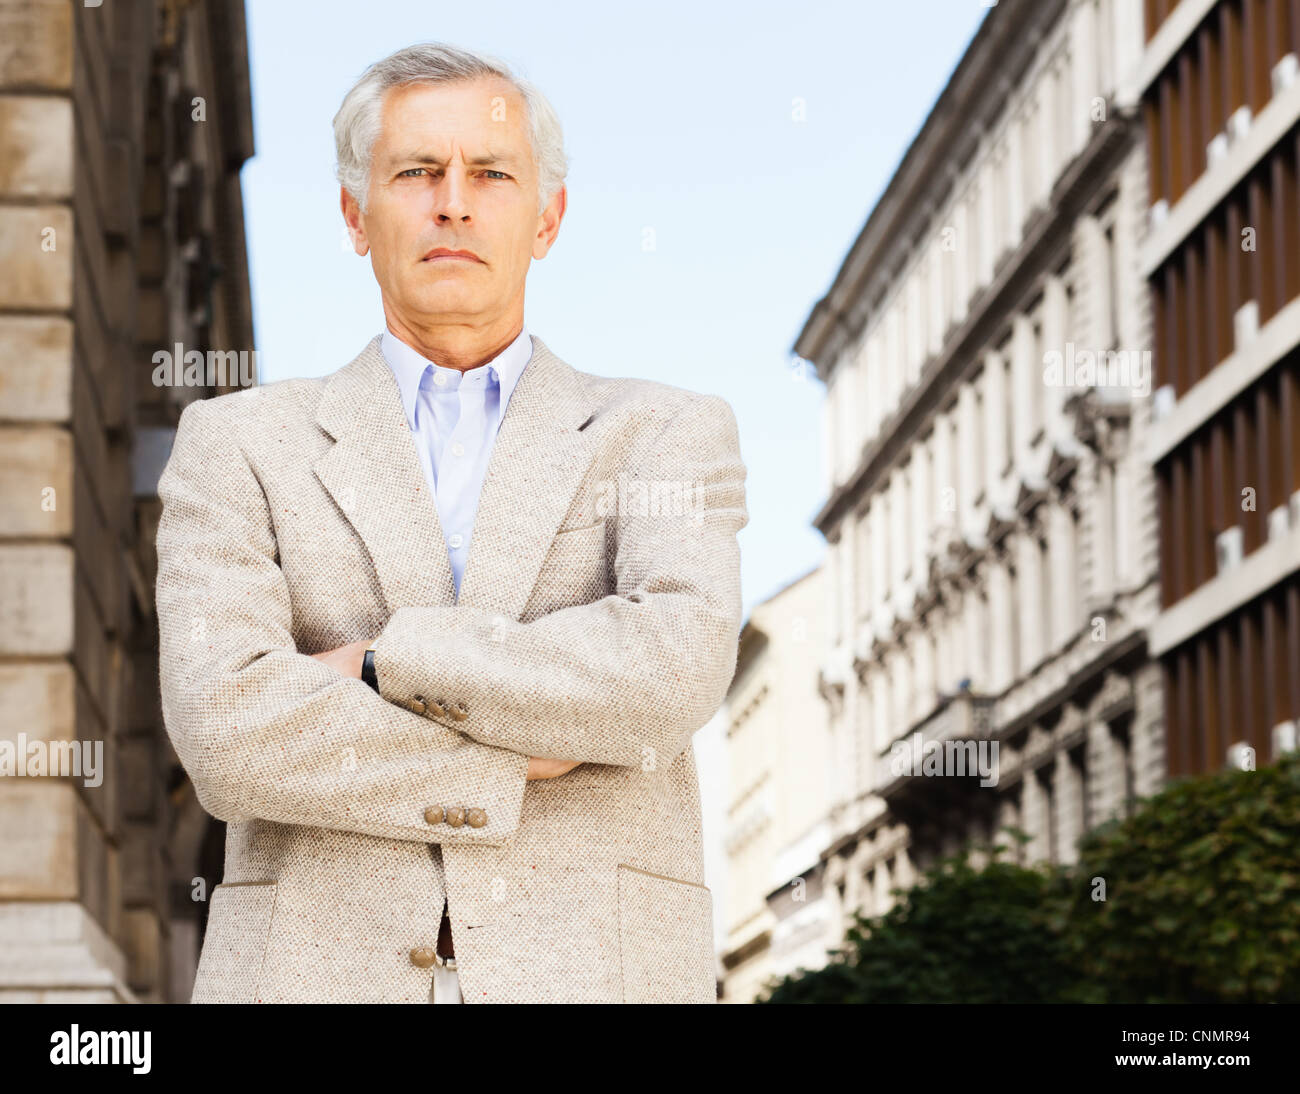 Businessman standing with arms crossed Stock Photo